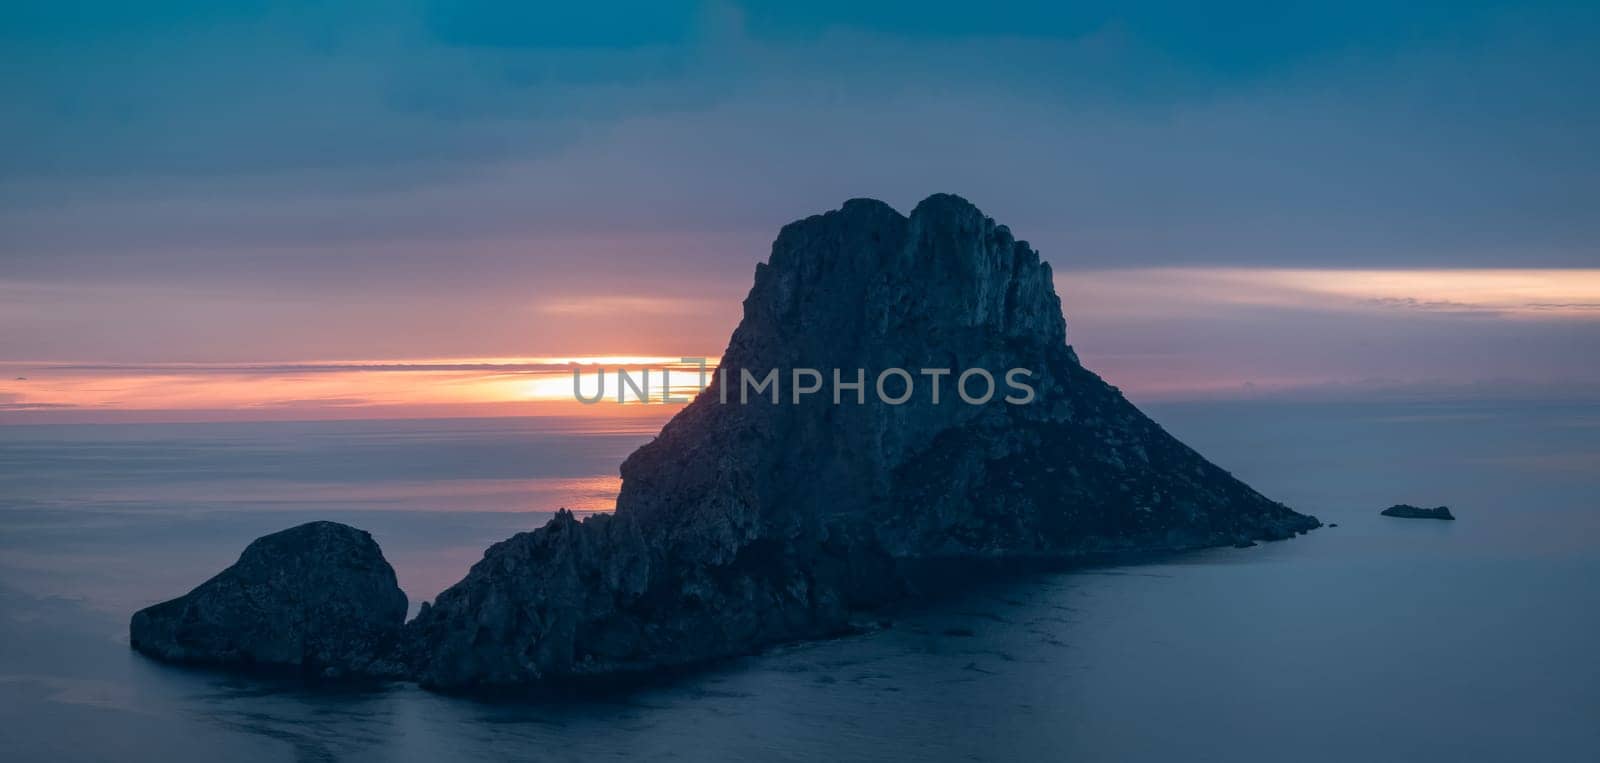 Serene sunset at Es Vedra in Ibiza with the sun descending behind the iconic rock in a calm sea.